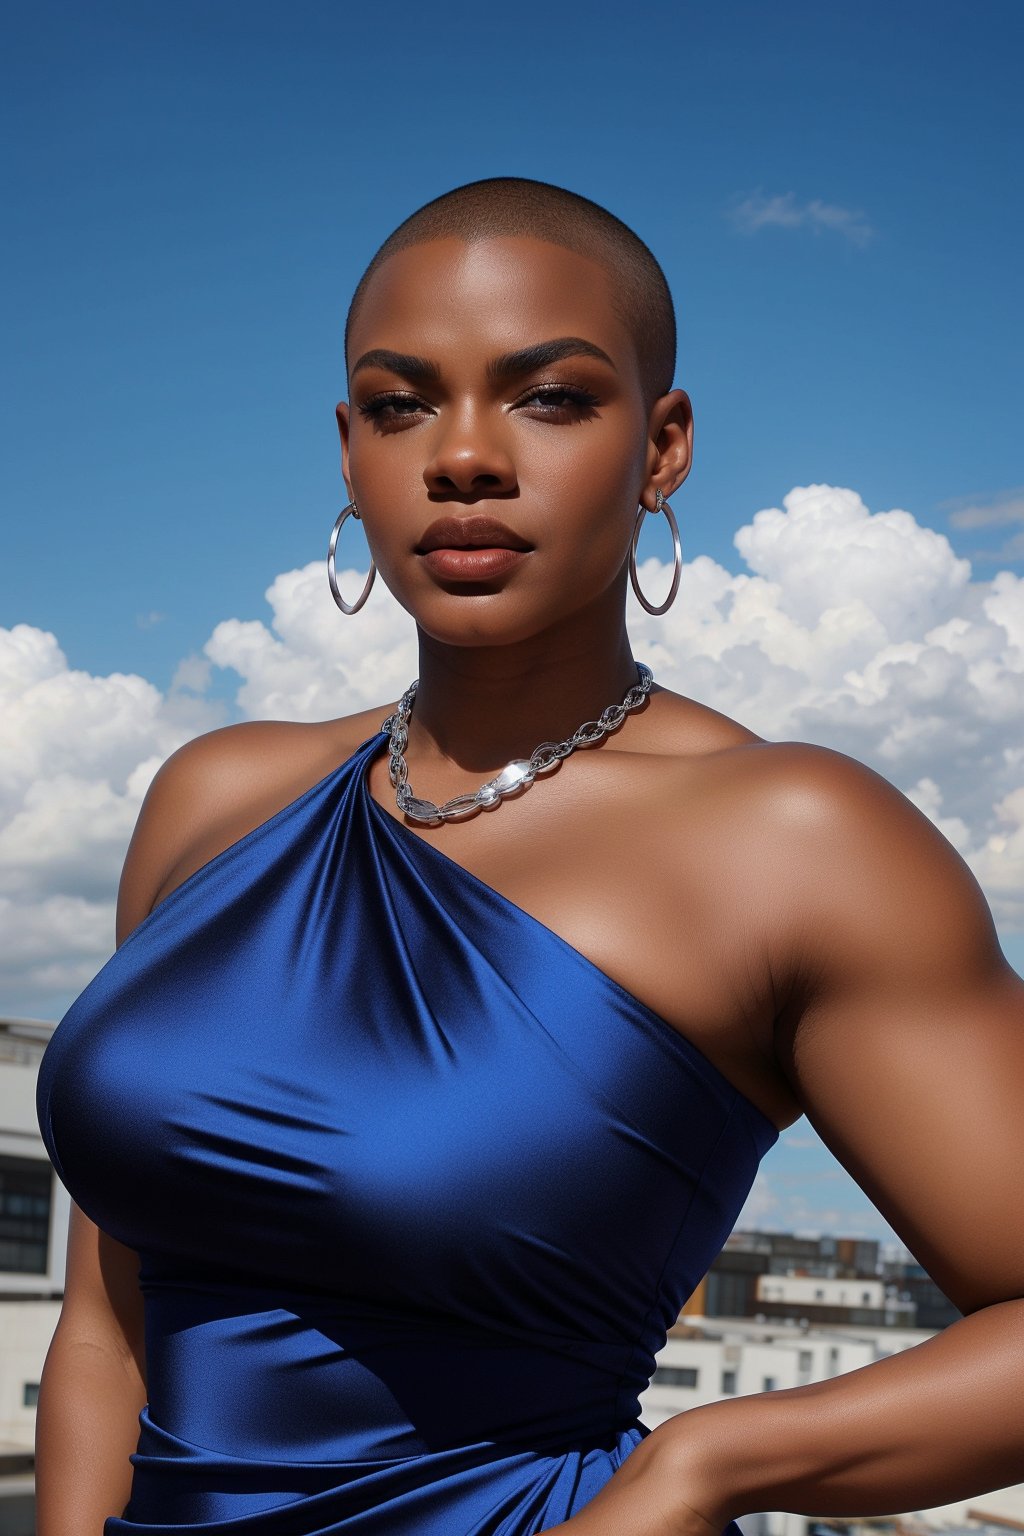 Black woman with a shaved head and piercing blue eyes, wearing a bold, asymmetrical red dress with a chunky silver necklace, strikes a powerful pose, arm raised with a slight bend at the elbow, showcasing her strength and determination against a backdrop of fluffy white clouds and a bright blue sky.